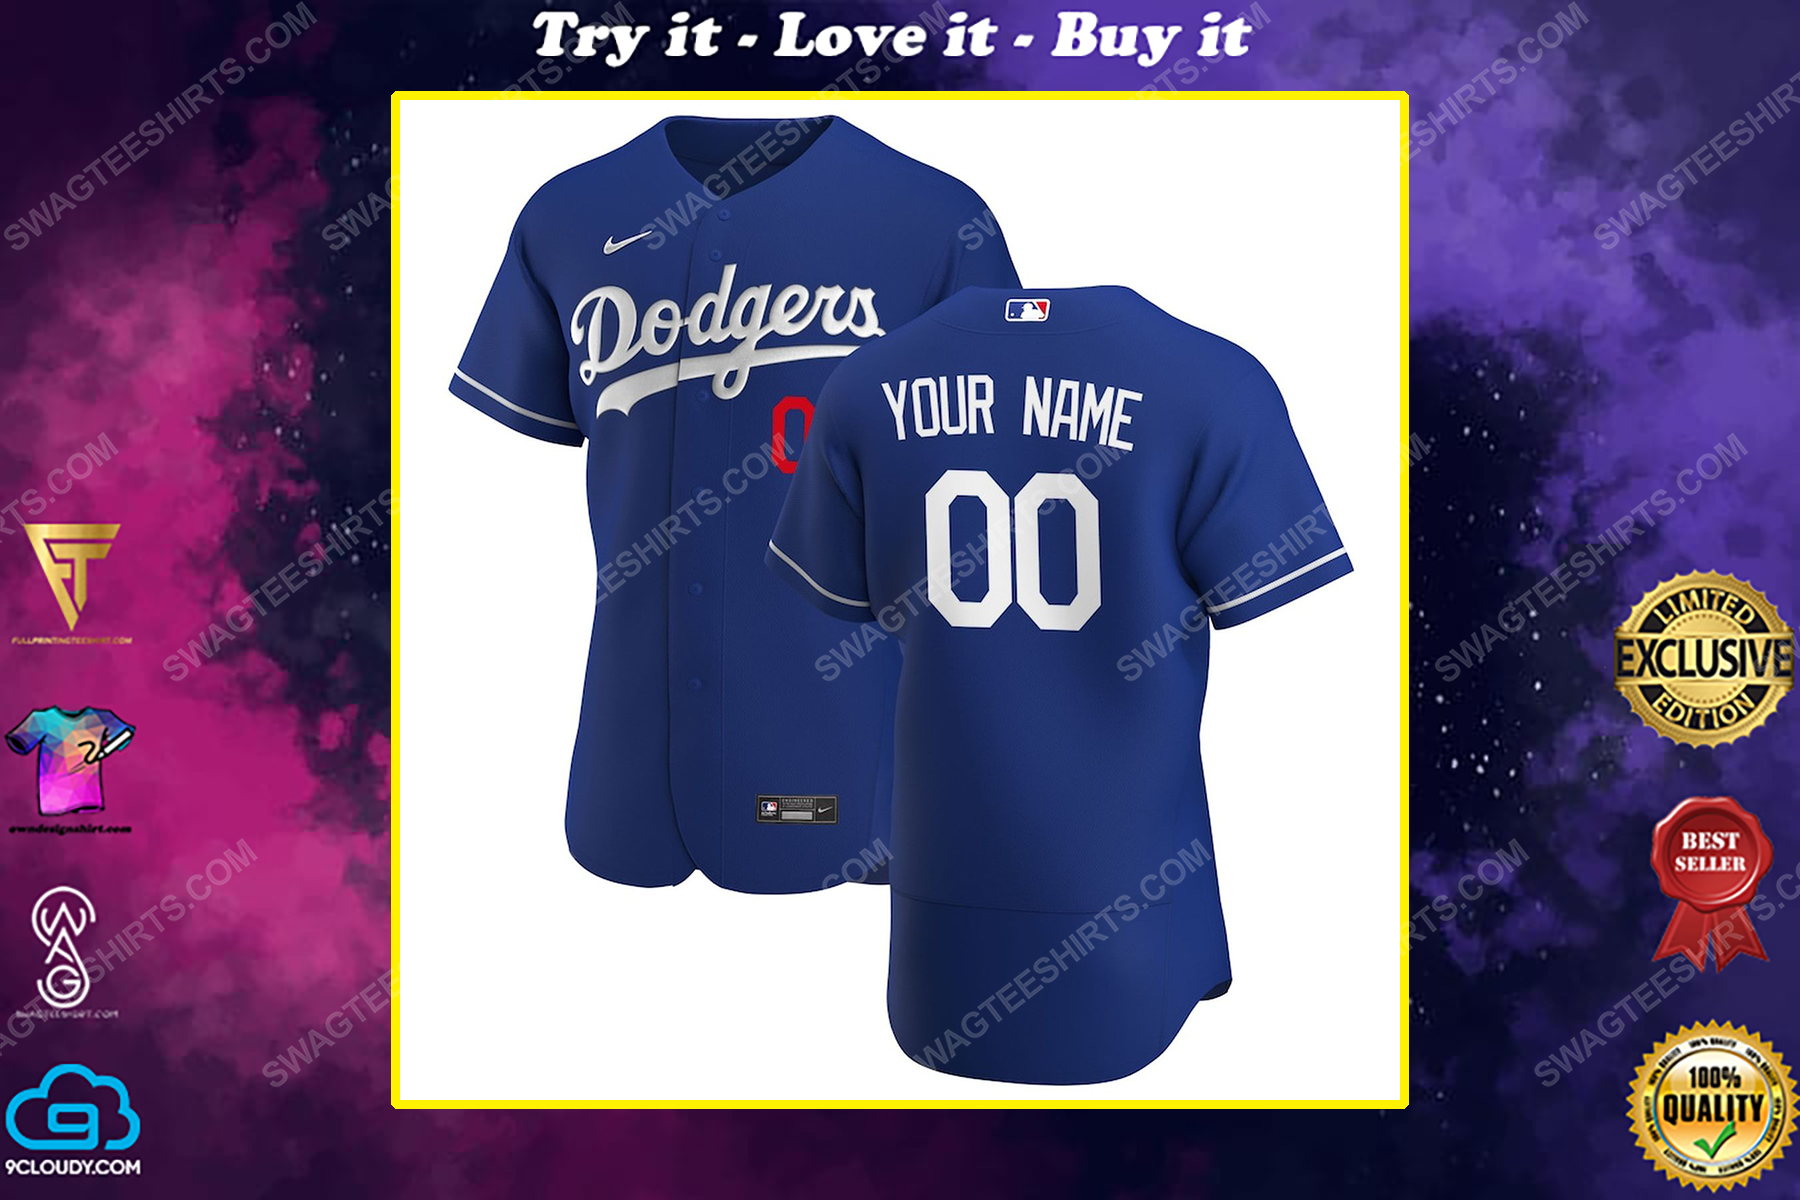 The best selling] Personalized mlb los angeles dodgers baseball jersey